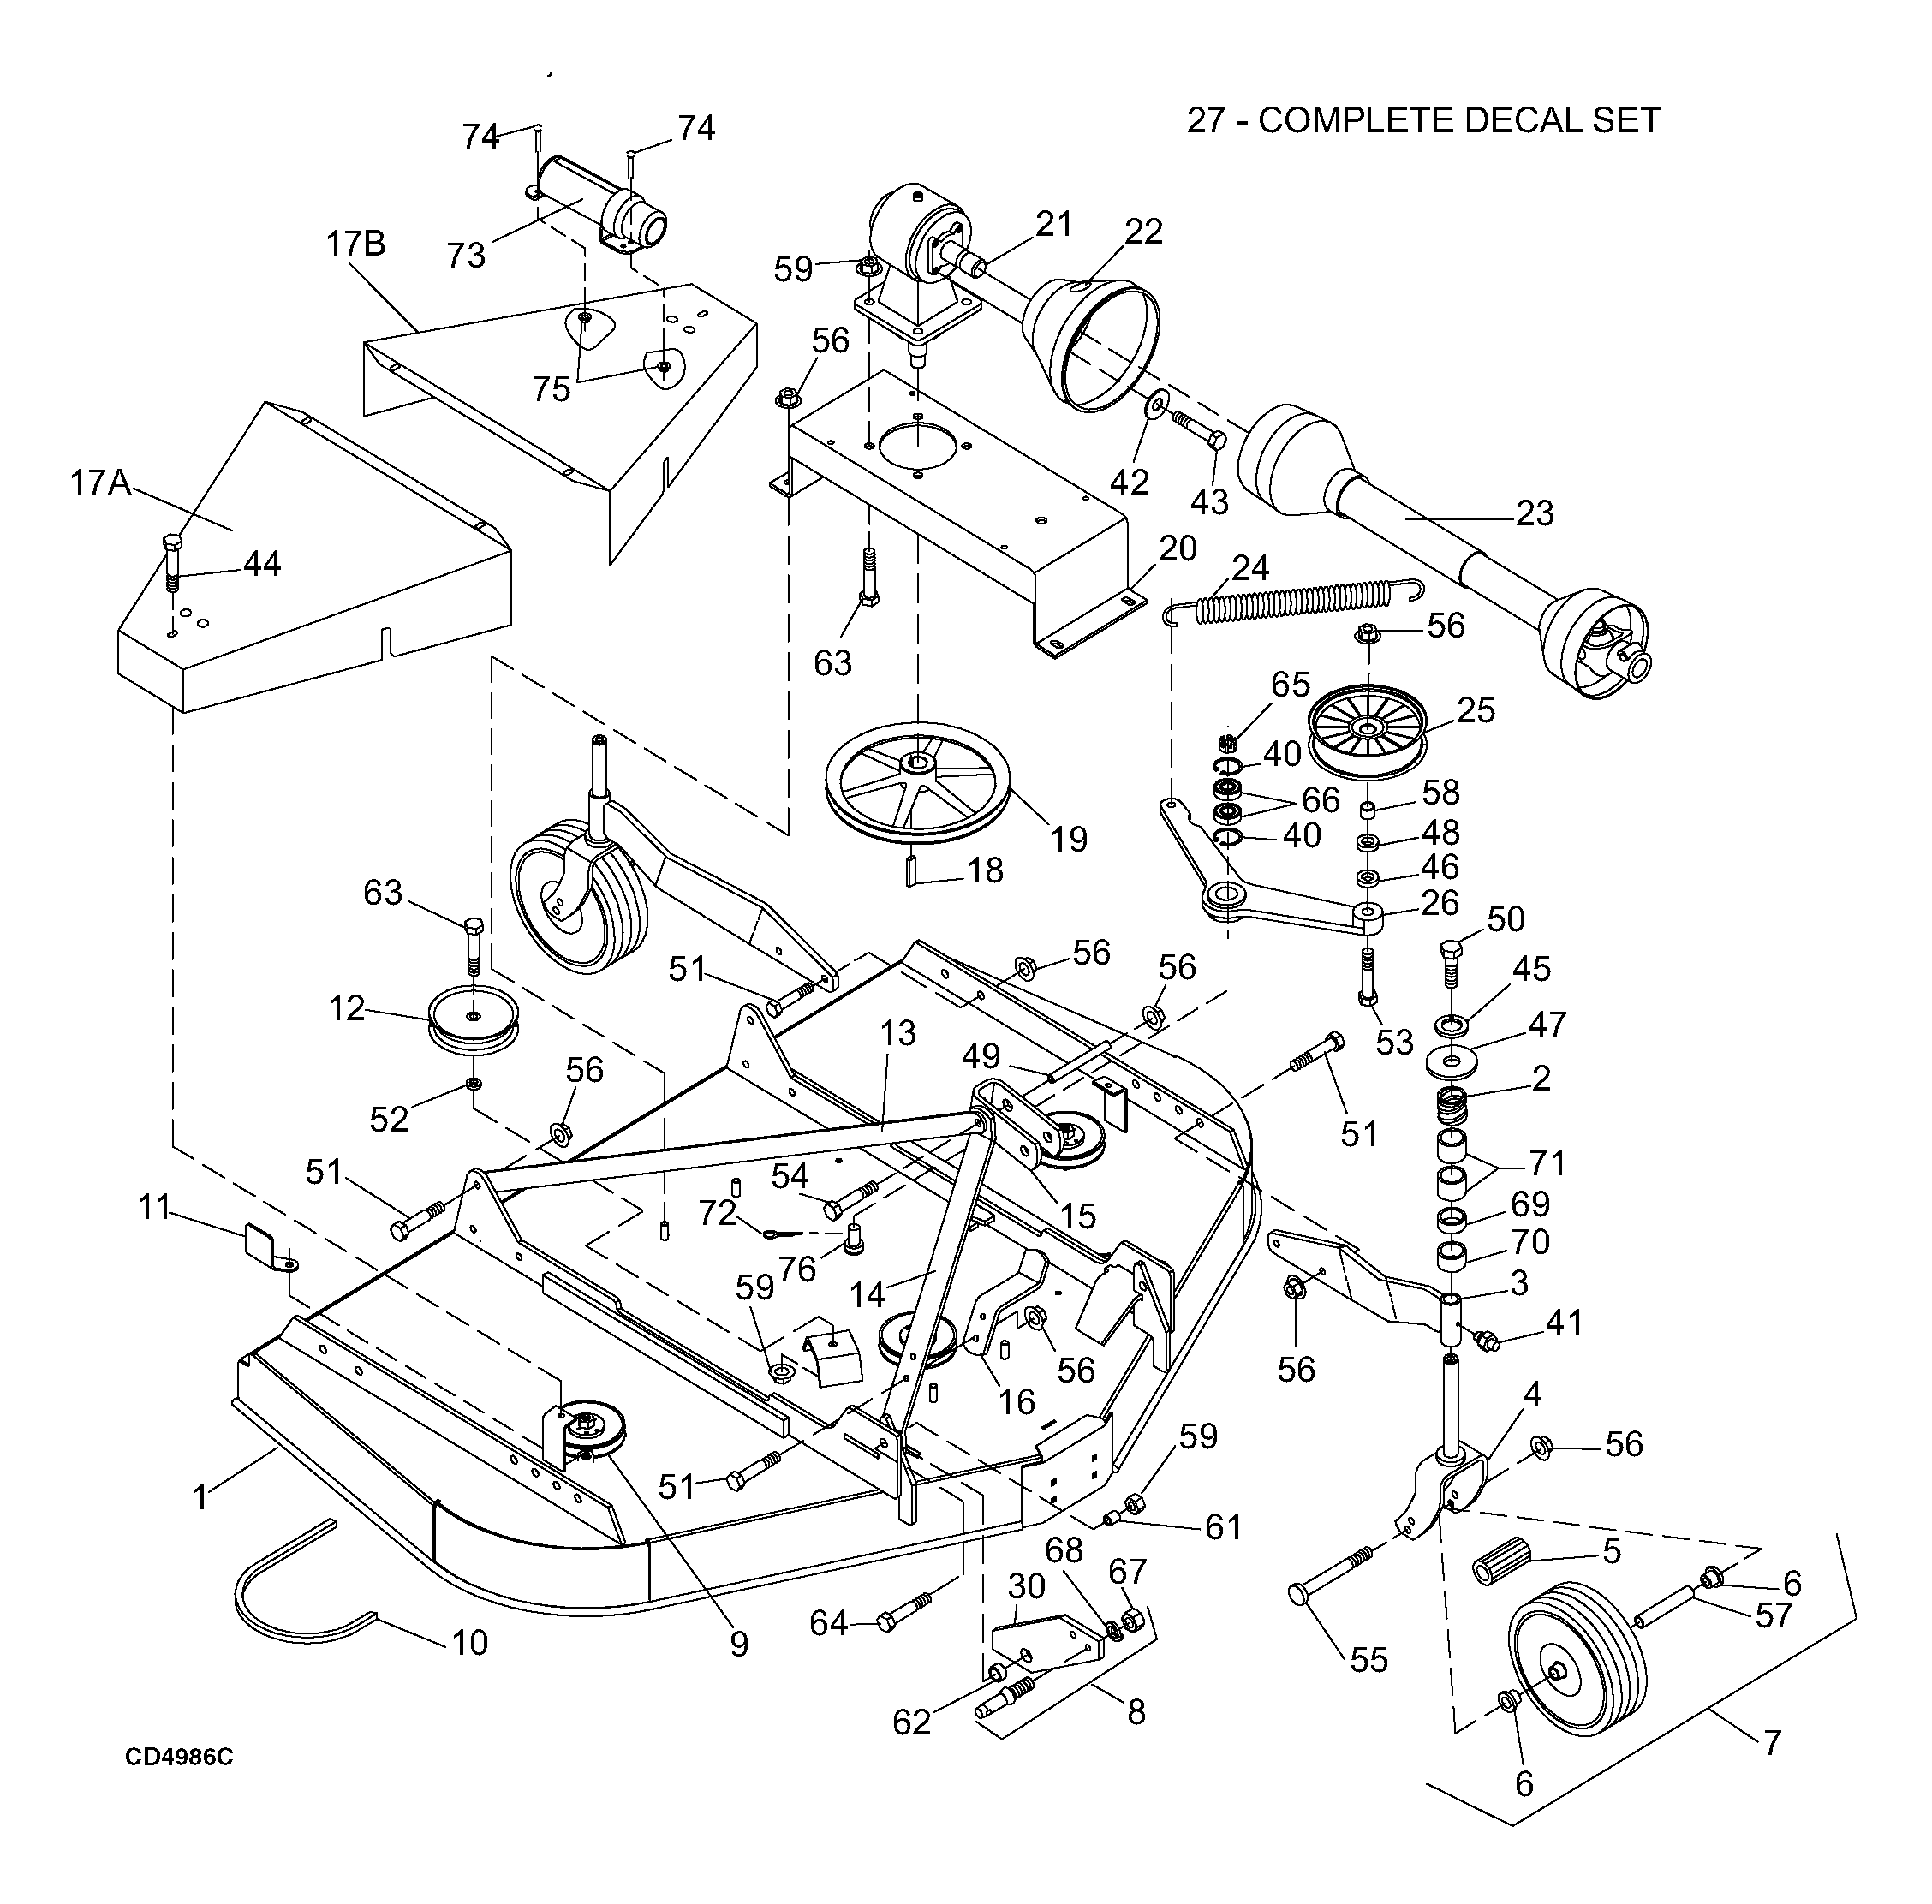 Woods Mower Parts Diagrams Woods Rd8400 2 Rearmount Finish Mower Main Frame Assembly Parts And